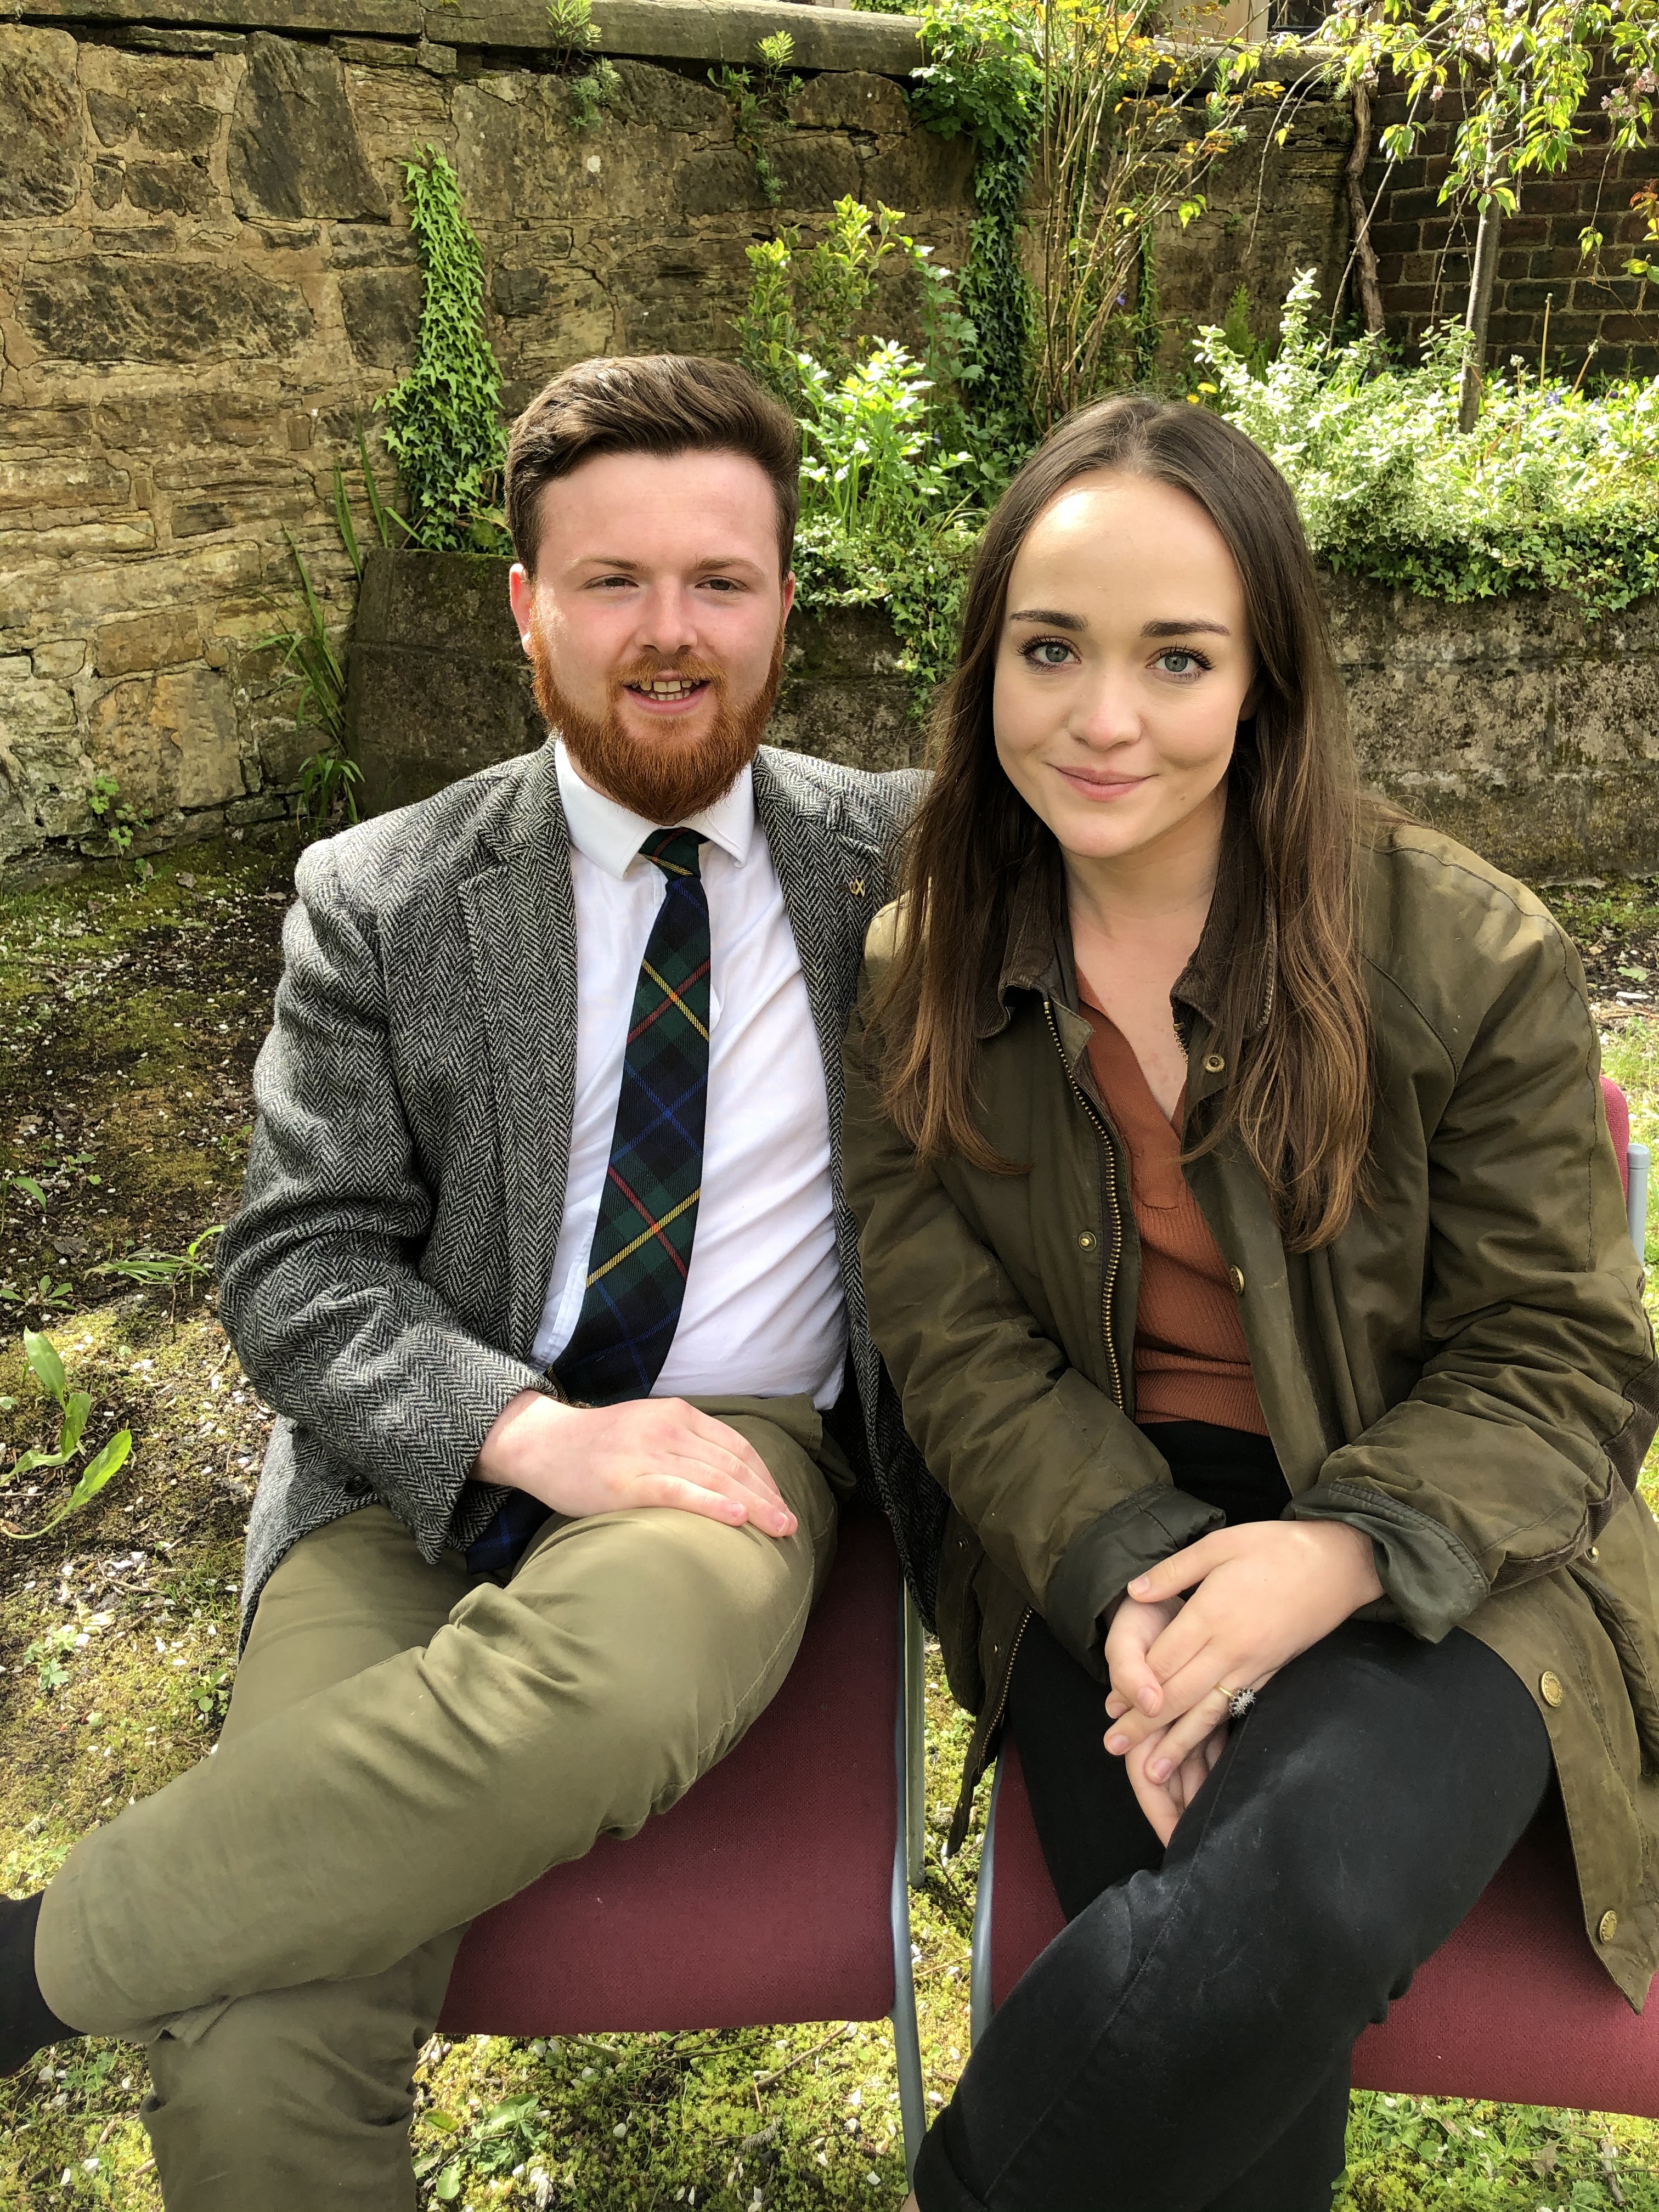 The pair, who met at Glasgow University, are planning to marry next April.